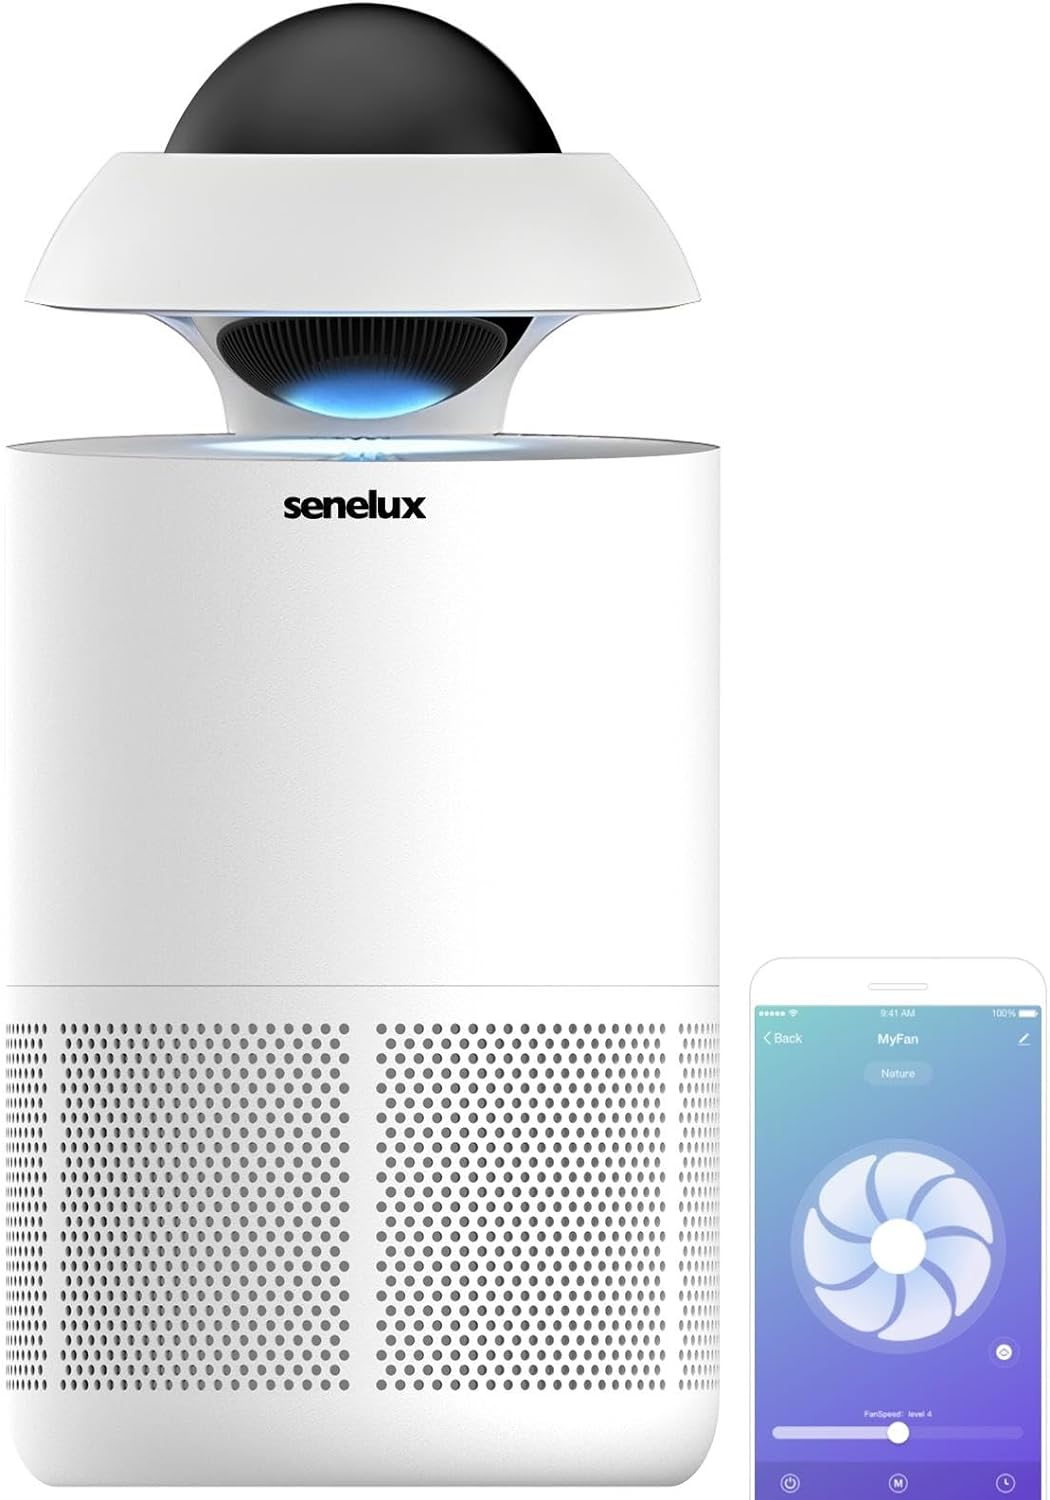 Senelux Air Purifier for Home Bedroom, H13 HEPA & Carbon Filters, CADR 100 m³/h, Removes 99.97% Pollen Allergies Dust Odours Smoke, Air Cleaner with Timer, Quiet 20dB Sleep Mode, Smart App Controls - Amazing Gadgets Outlet